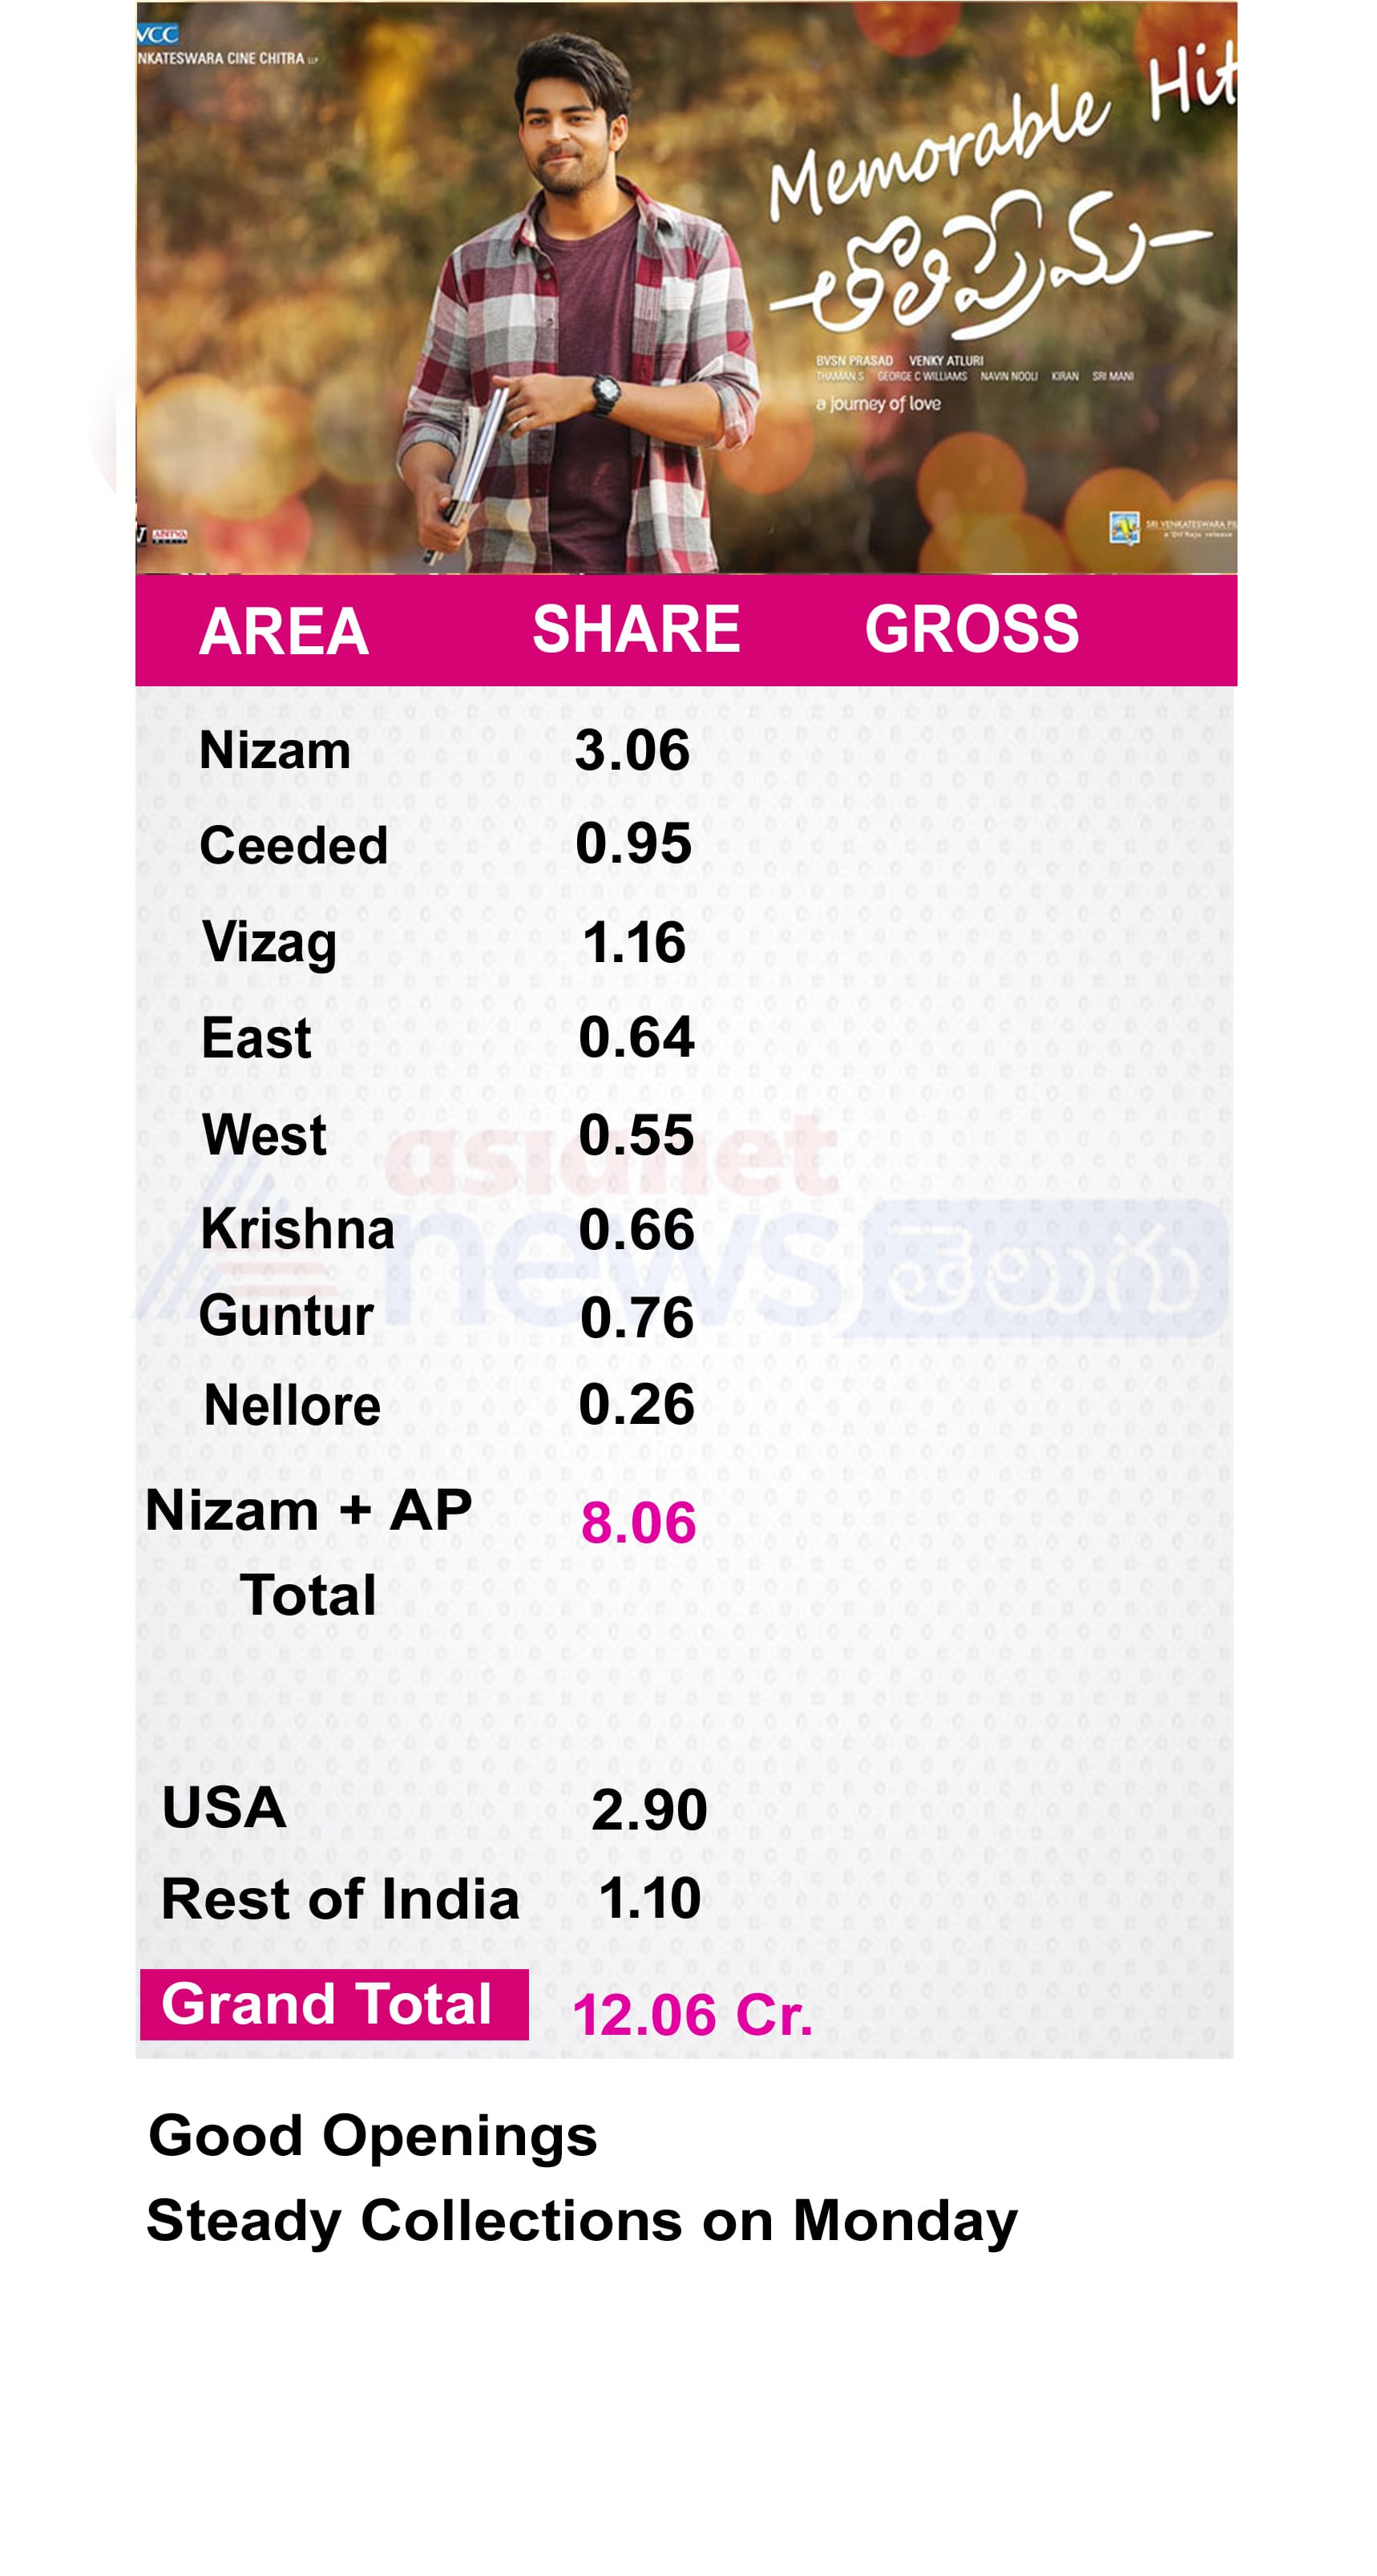 Tholiprema collections rocking all over